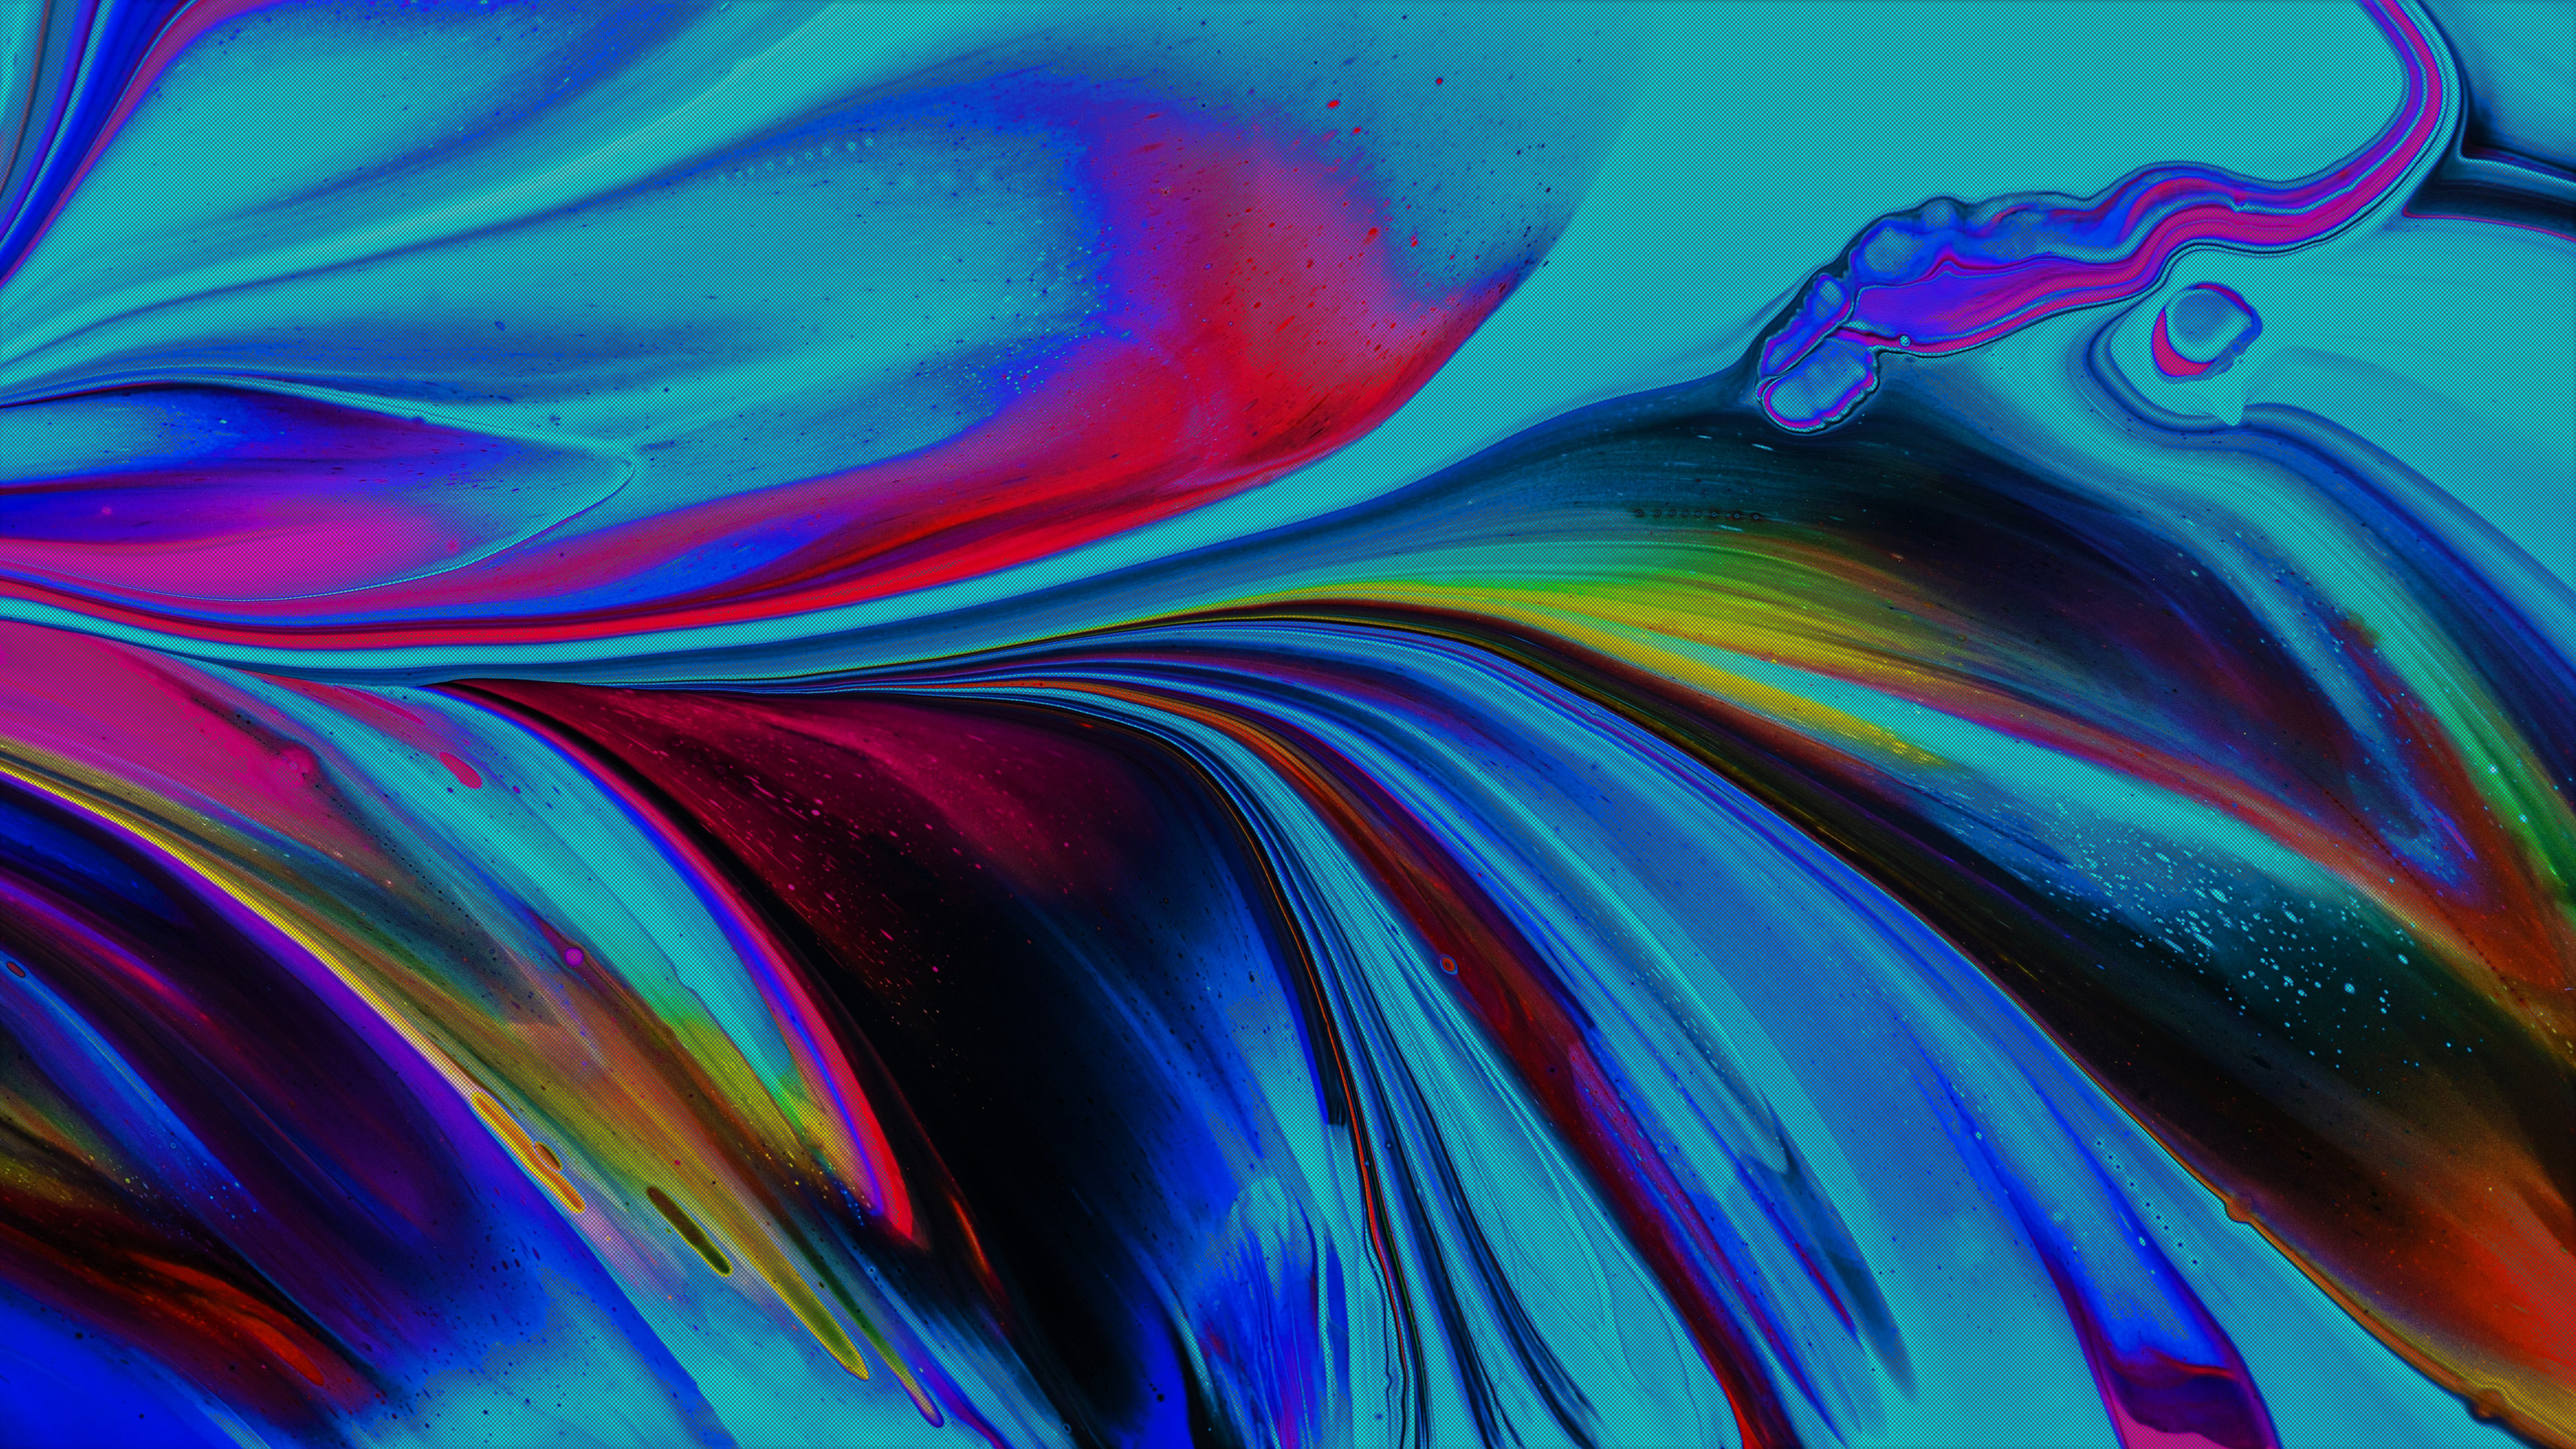 Colorful Abstract Textured Liquid 3840x2160